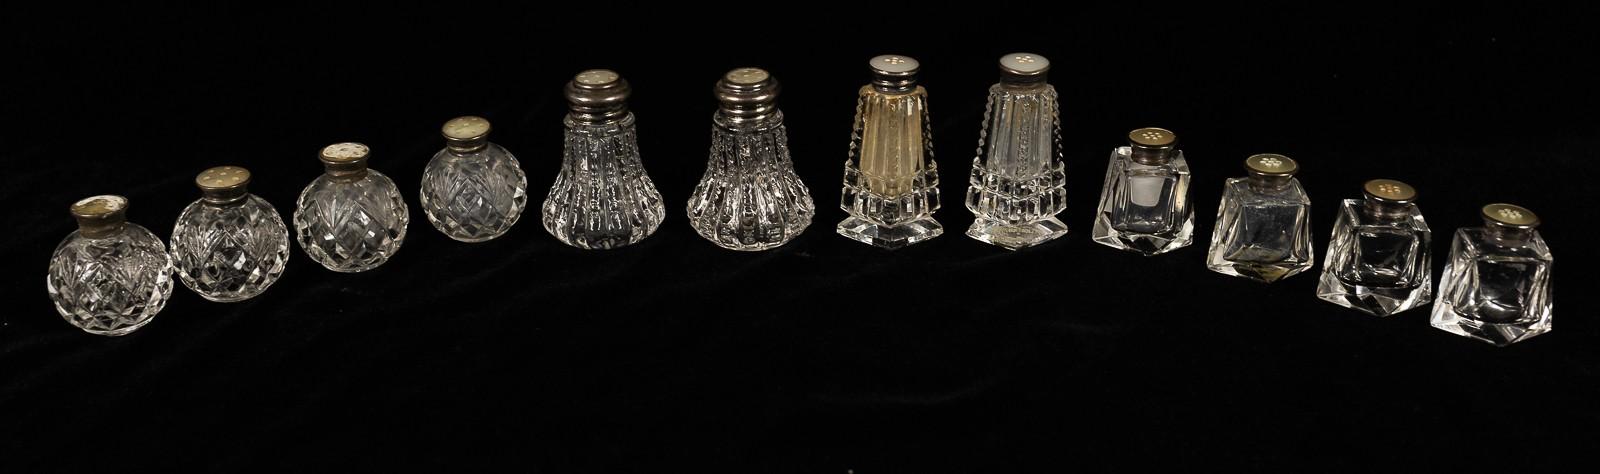 SIX PAIRS OF STERLING LIDDED SHAKERS